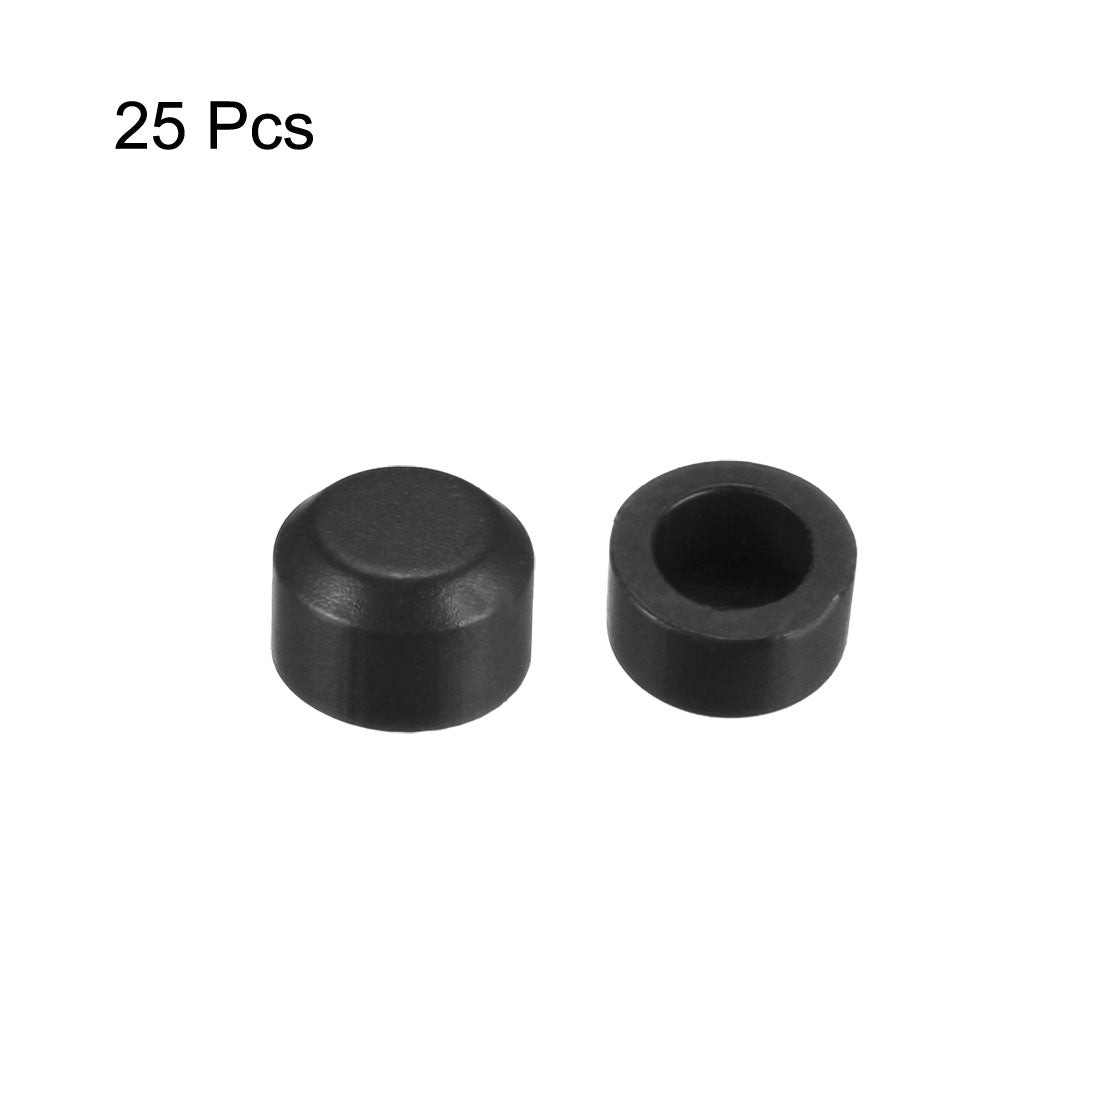 uxcell Uxcell 25pcs 3.1mm Hole Dia Plastic Pushbutton Tactile Switch Caps Cover Keycaps Protector Black for 6x6 Tact Switch